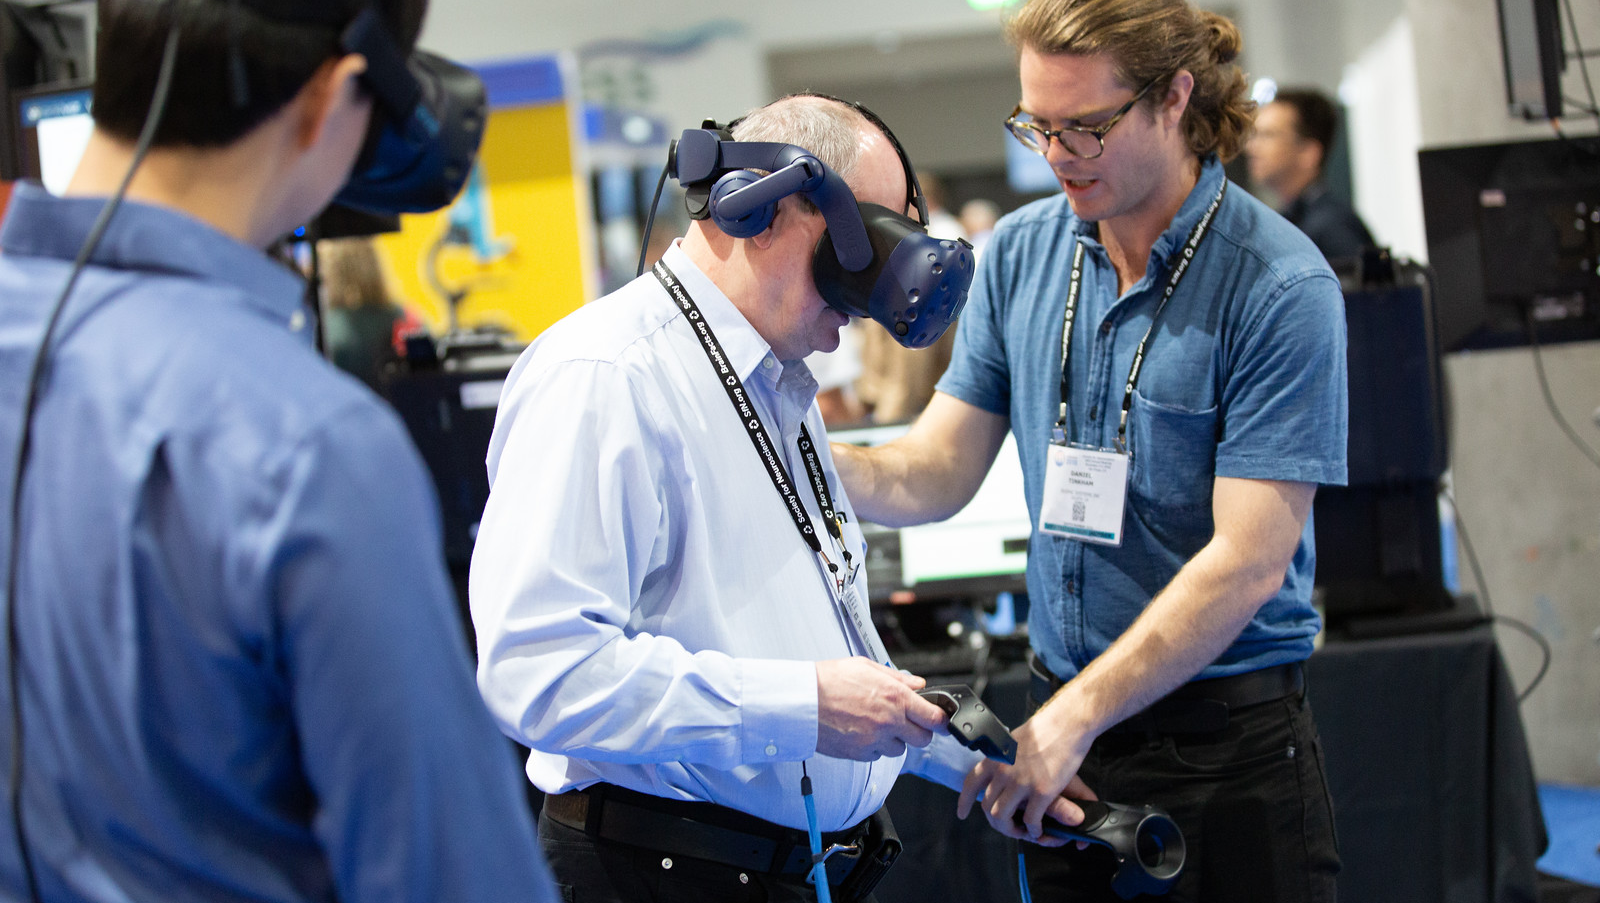 Scientists experience virtual reality at Neuroscience 2018